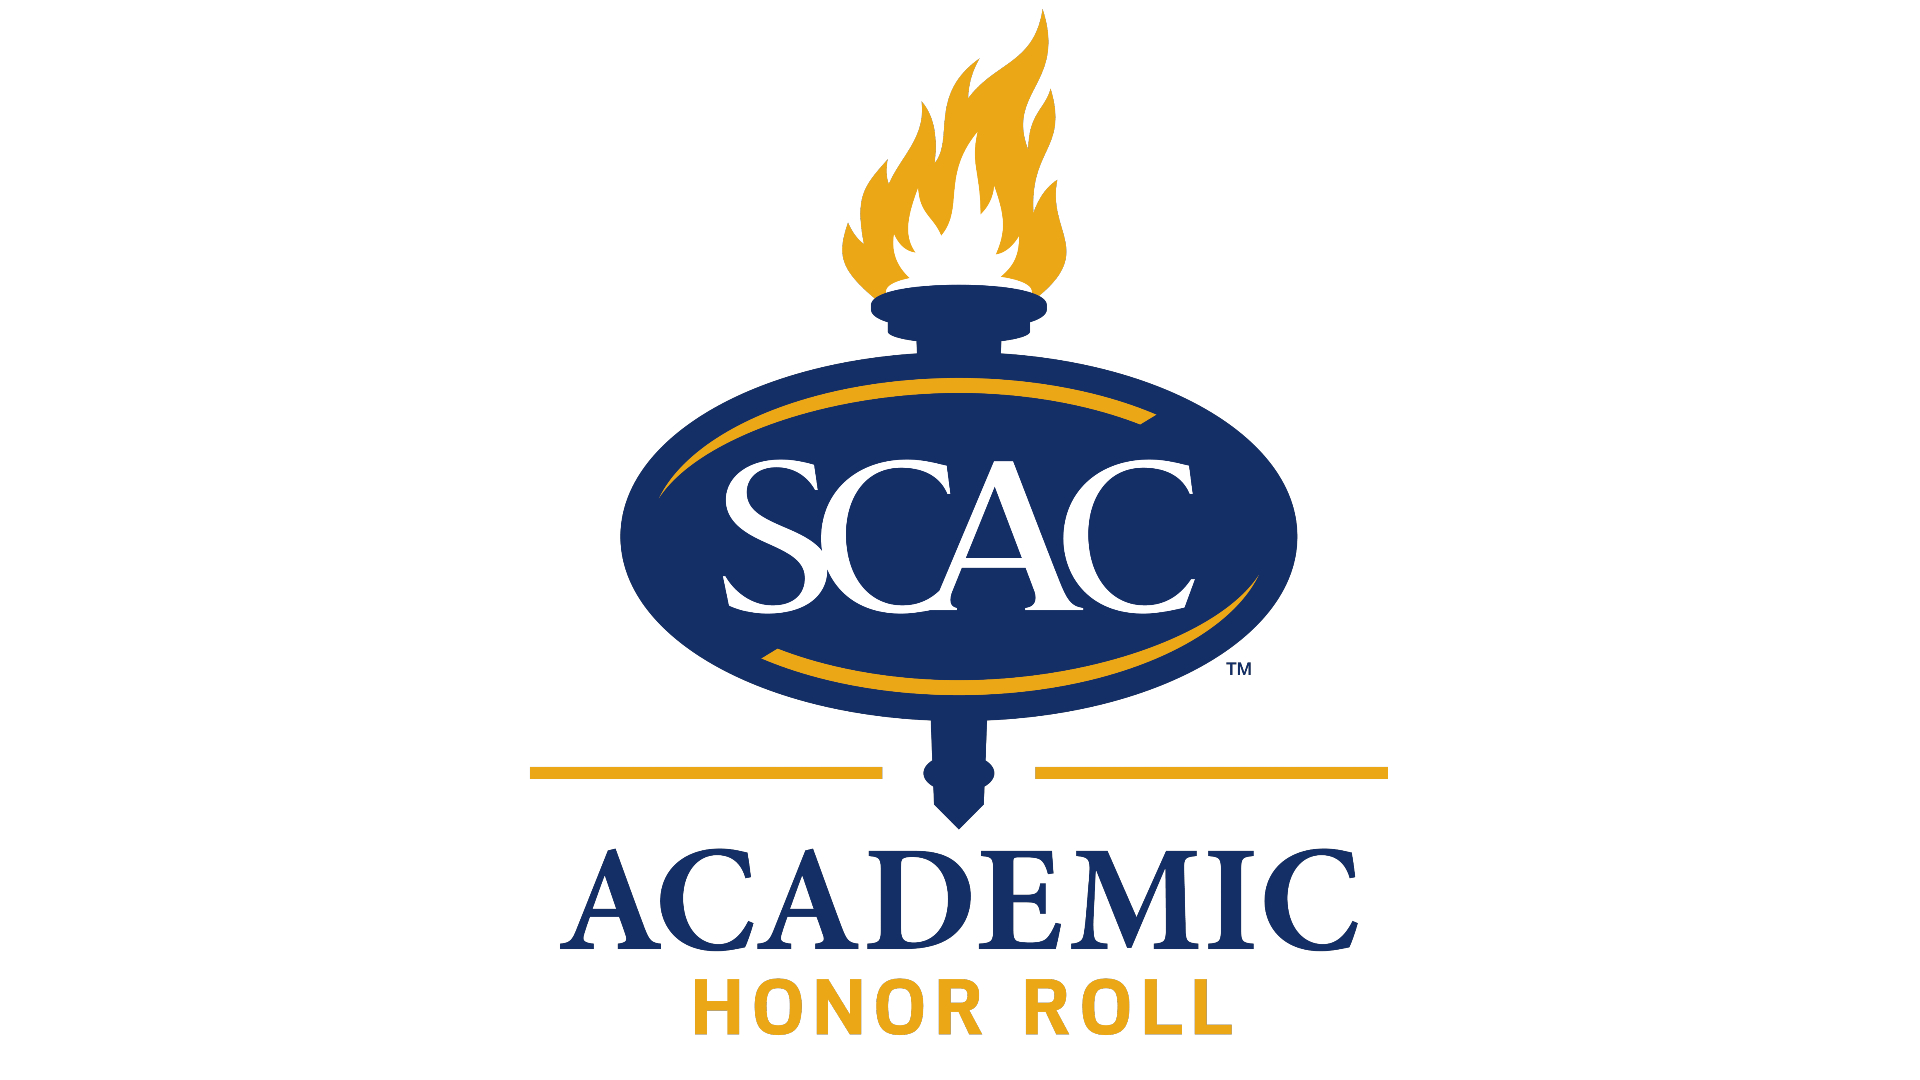 113 Crusaders qualified on SCAC Academic Honor Roll